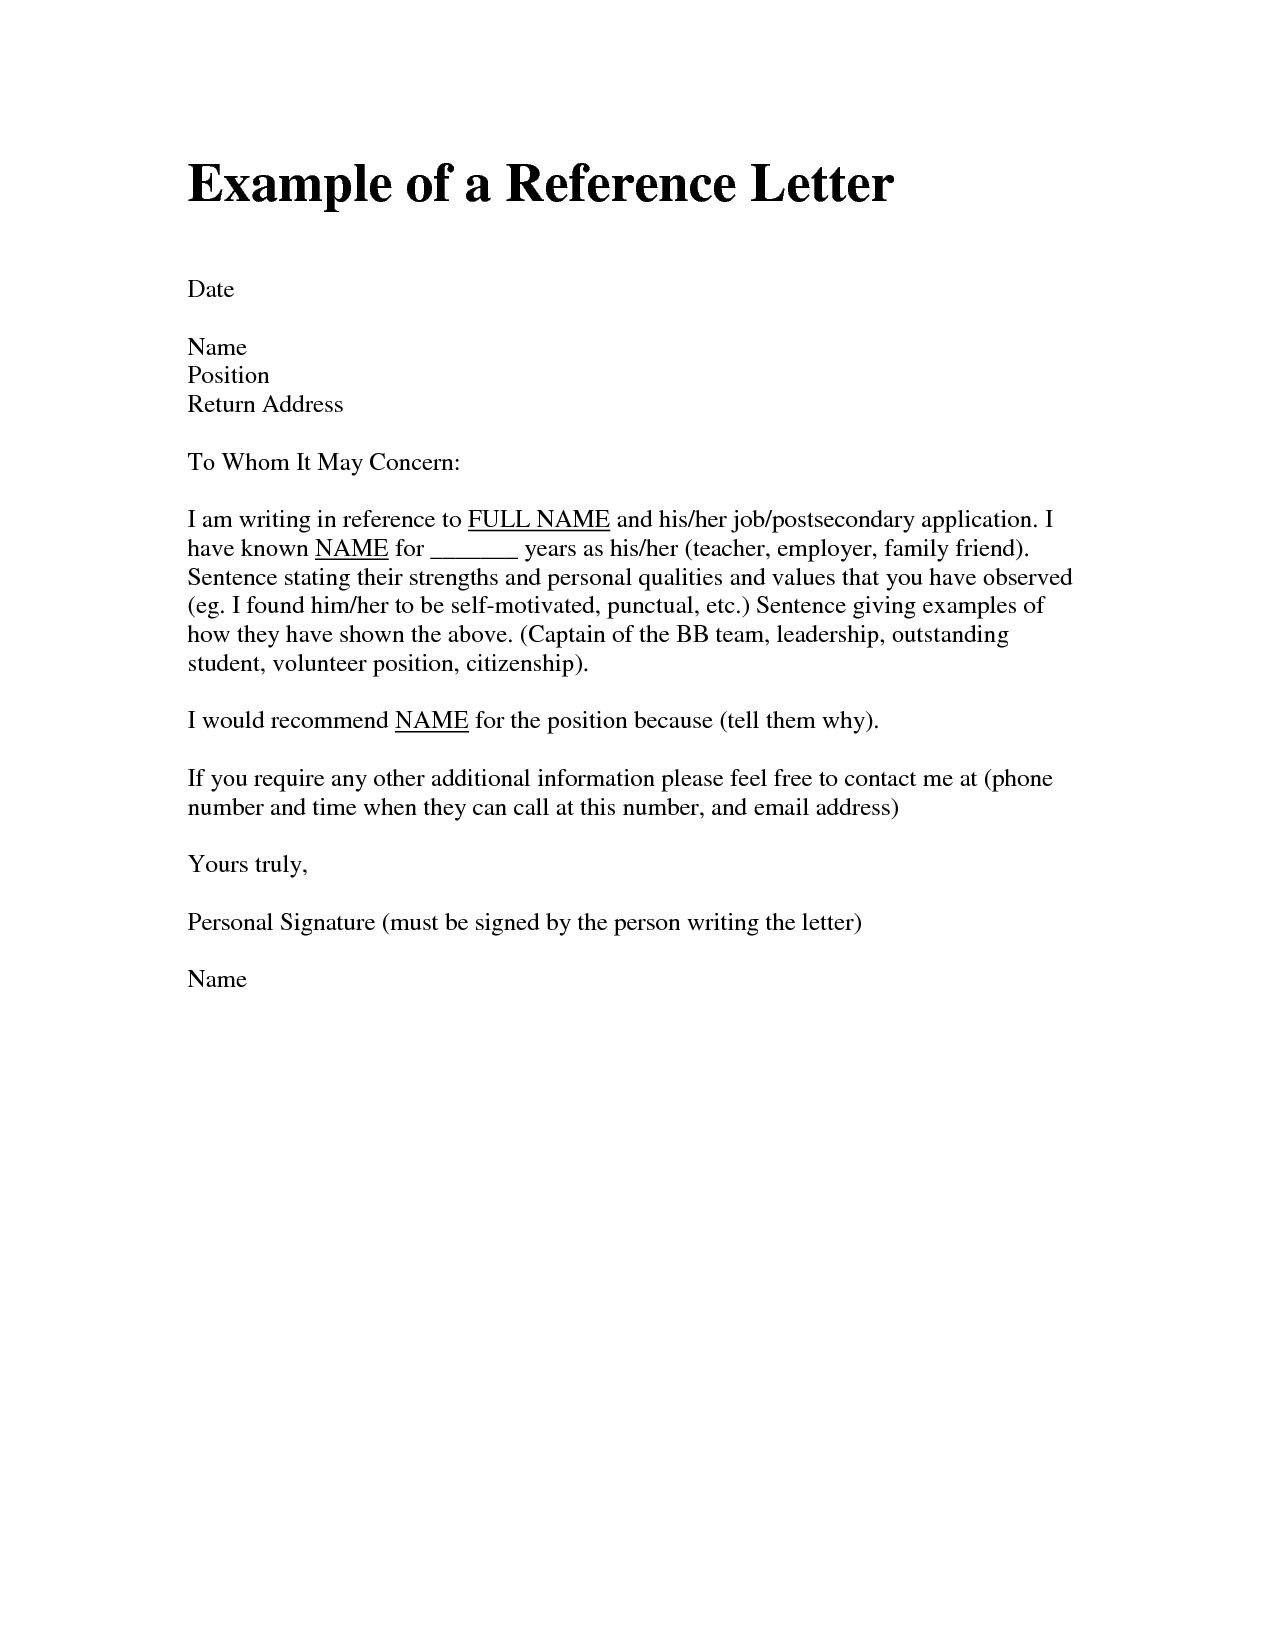 Sample Recommendation Letter For Friend Ivedipreceptivco within size 1275 X 1650